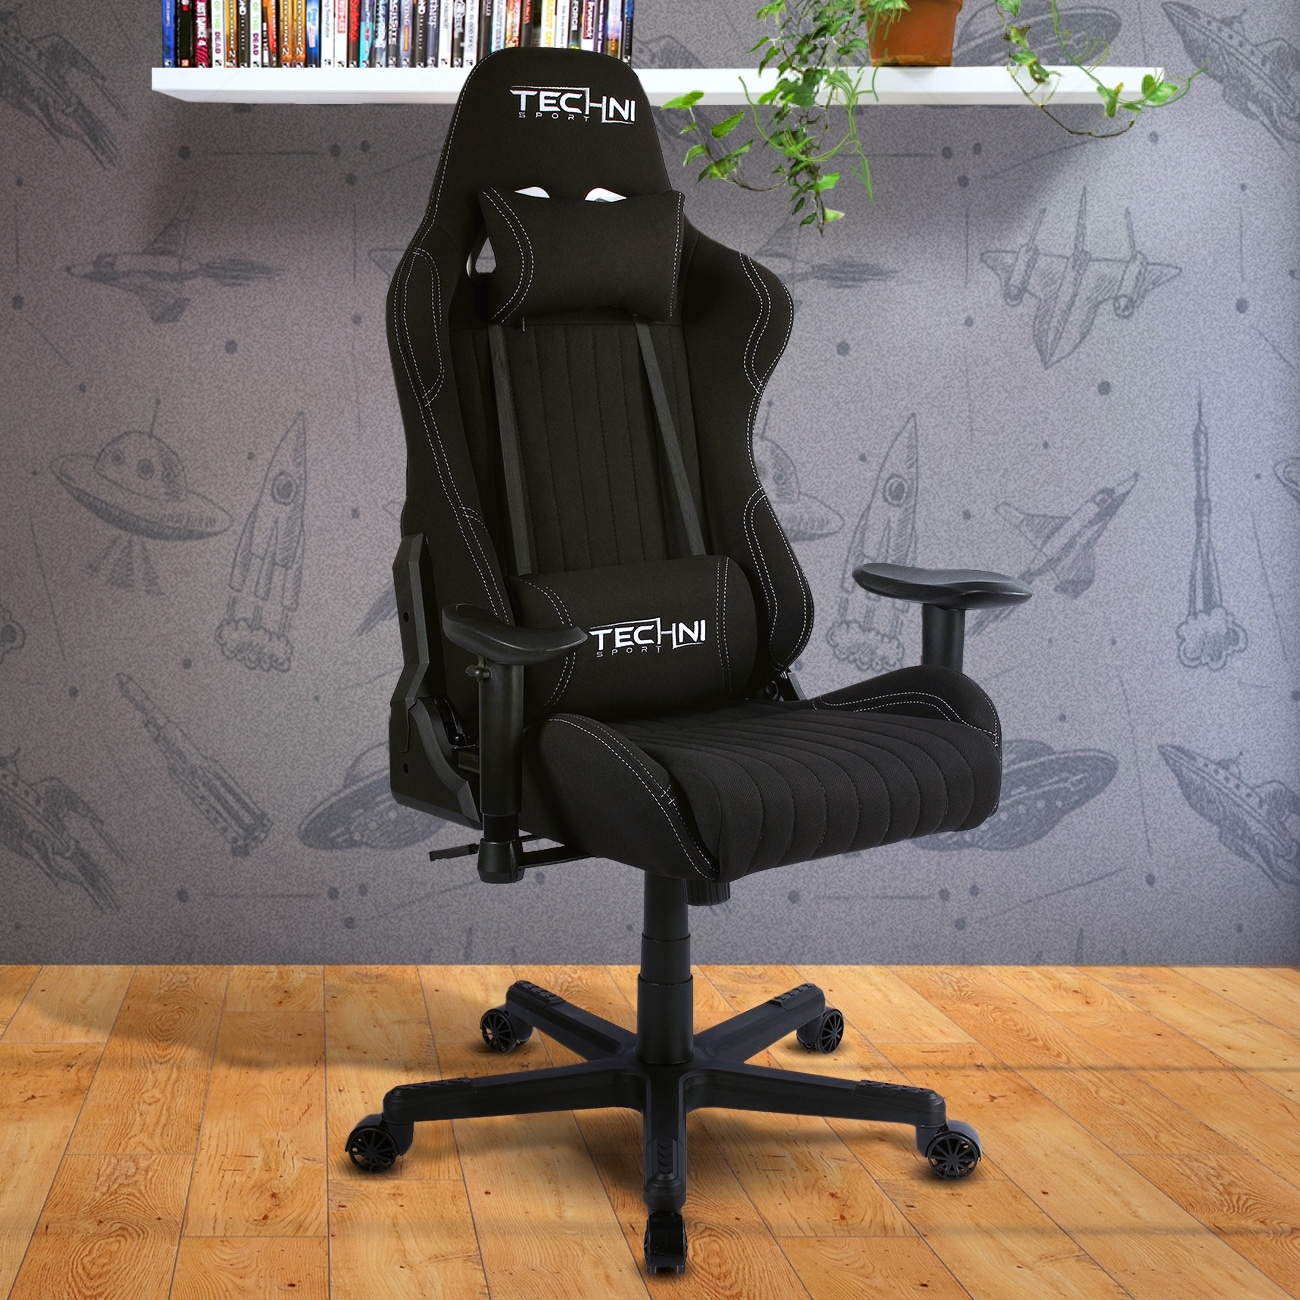 https://ak1.ostkcdn.com/images/products/is/images/direct/e74bffa9dcd7ad1cf2ab93df815482c8635a2398/Ergonomic-High-Back-Racer-Style-Height-Adjustable-Gaming-Chair-with-Adjustable-Armrests-%0ANon-marking-Casters.jpg